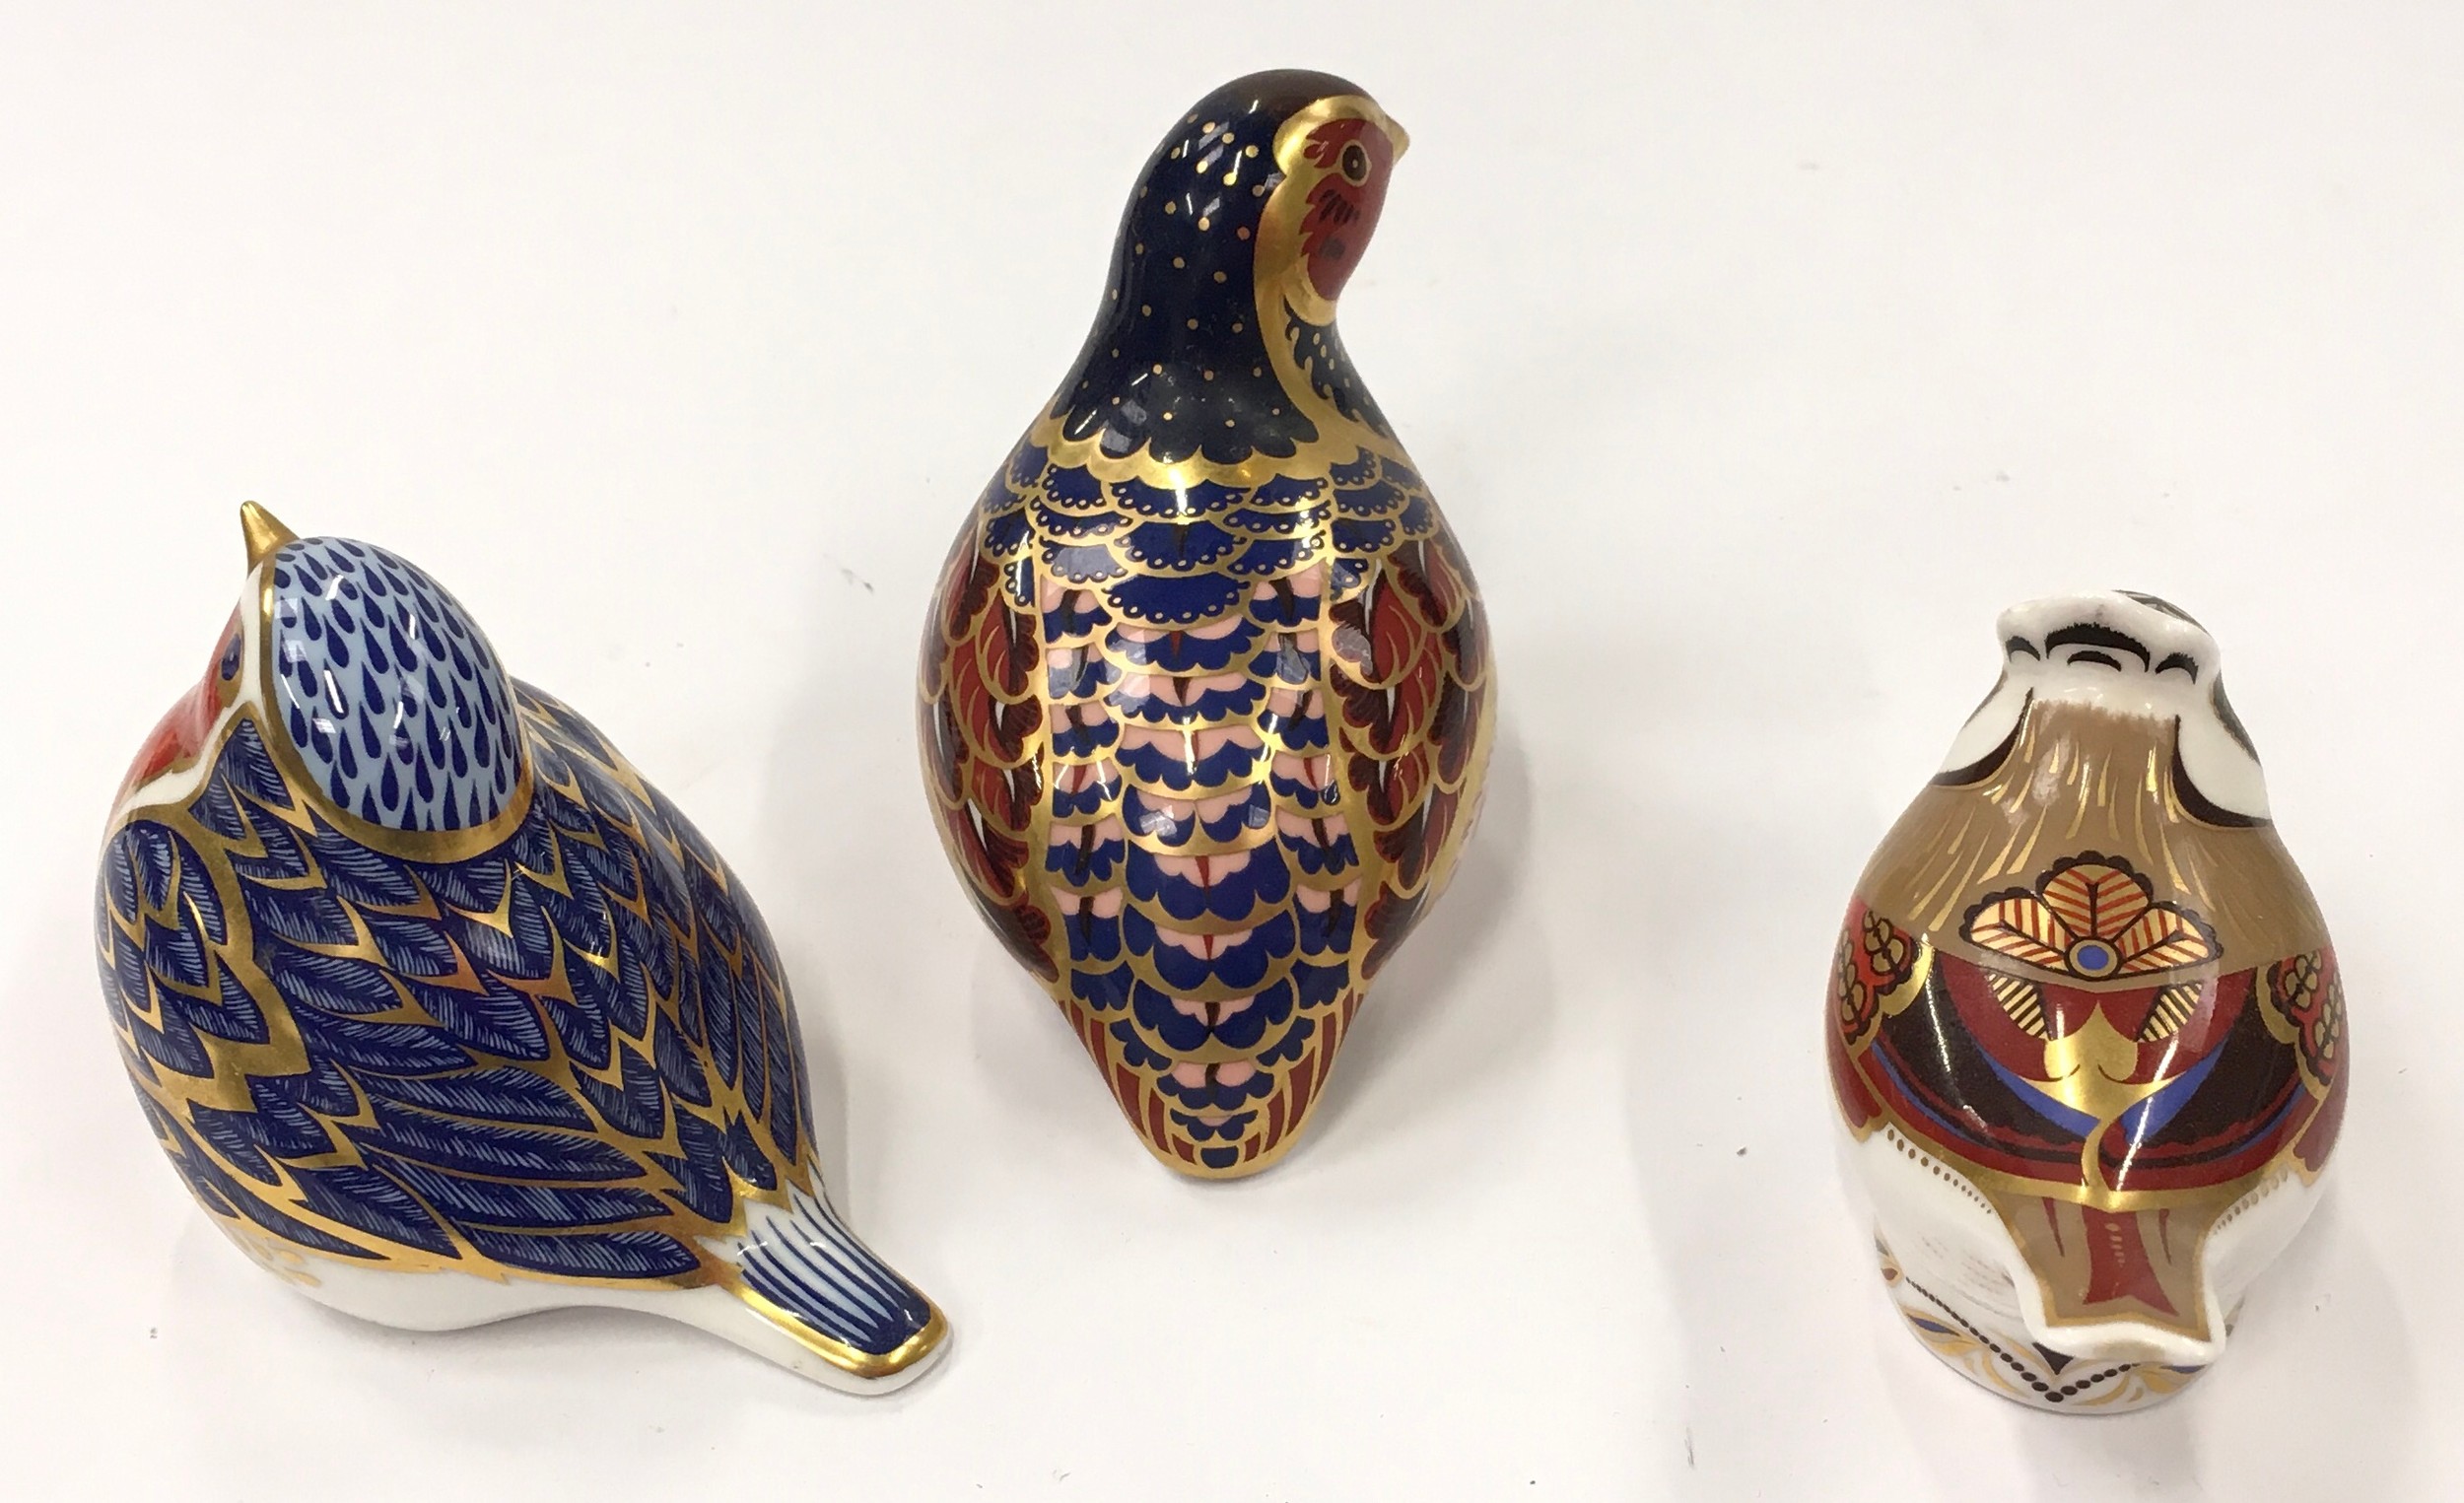 Royal crown Derby collection of bird paperweights (3). - Image 3 of 4